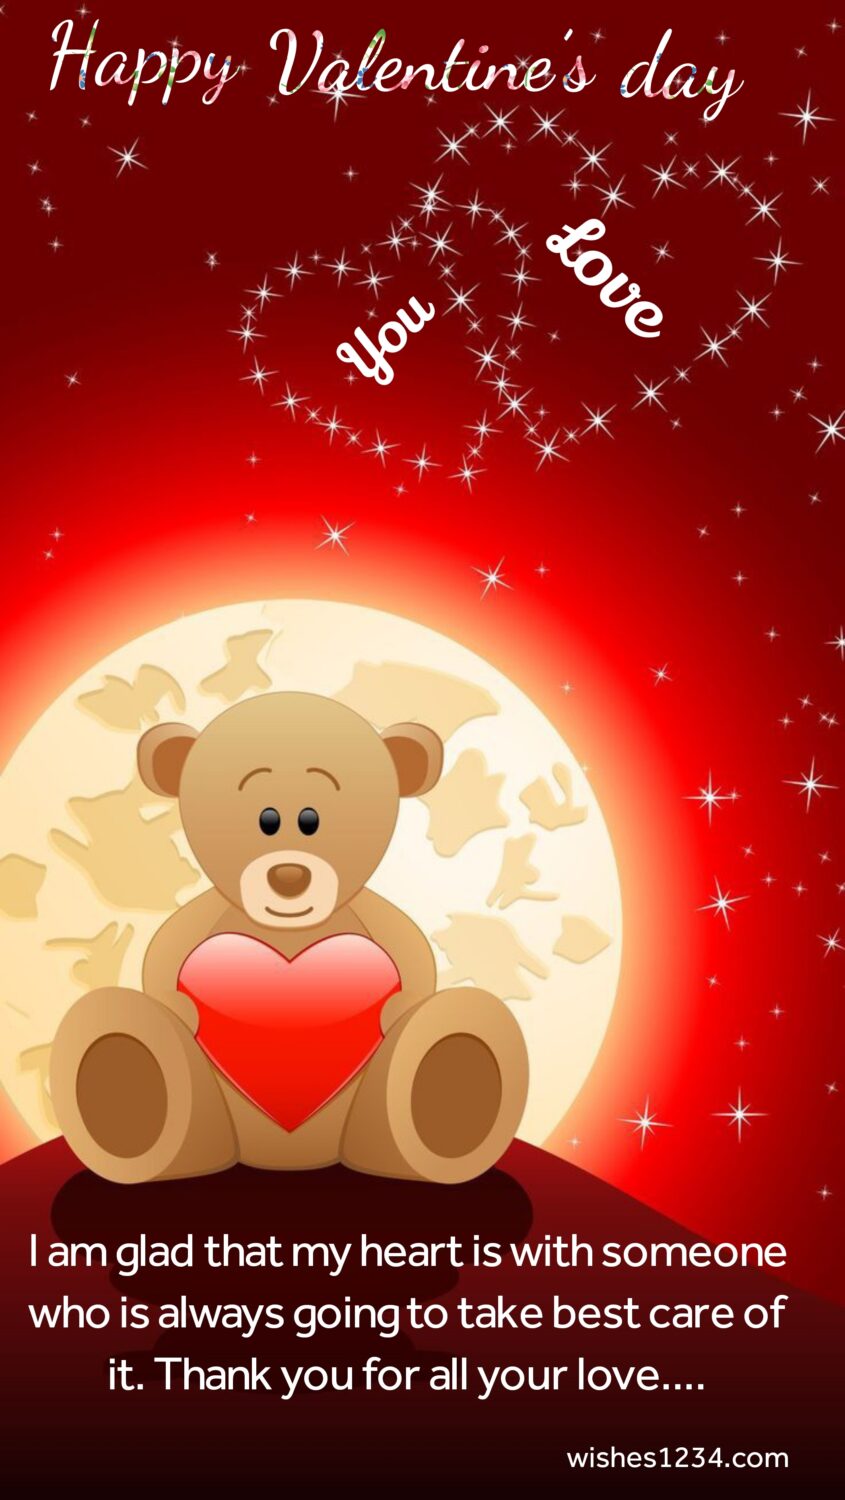 Teddy bear with moon in background, Valentine's Day | Valentine quotes.